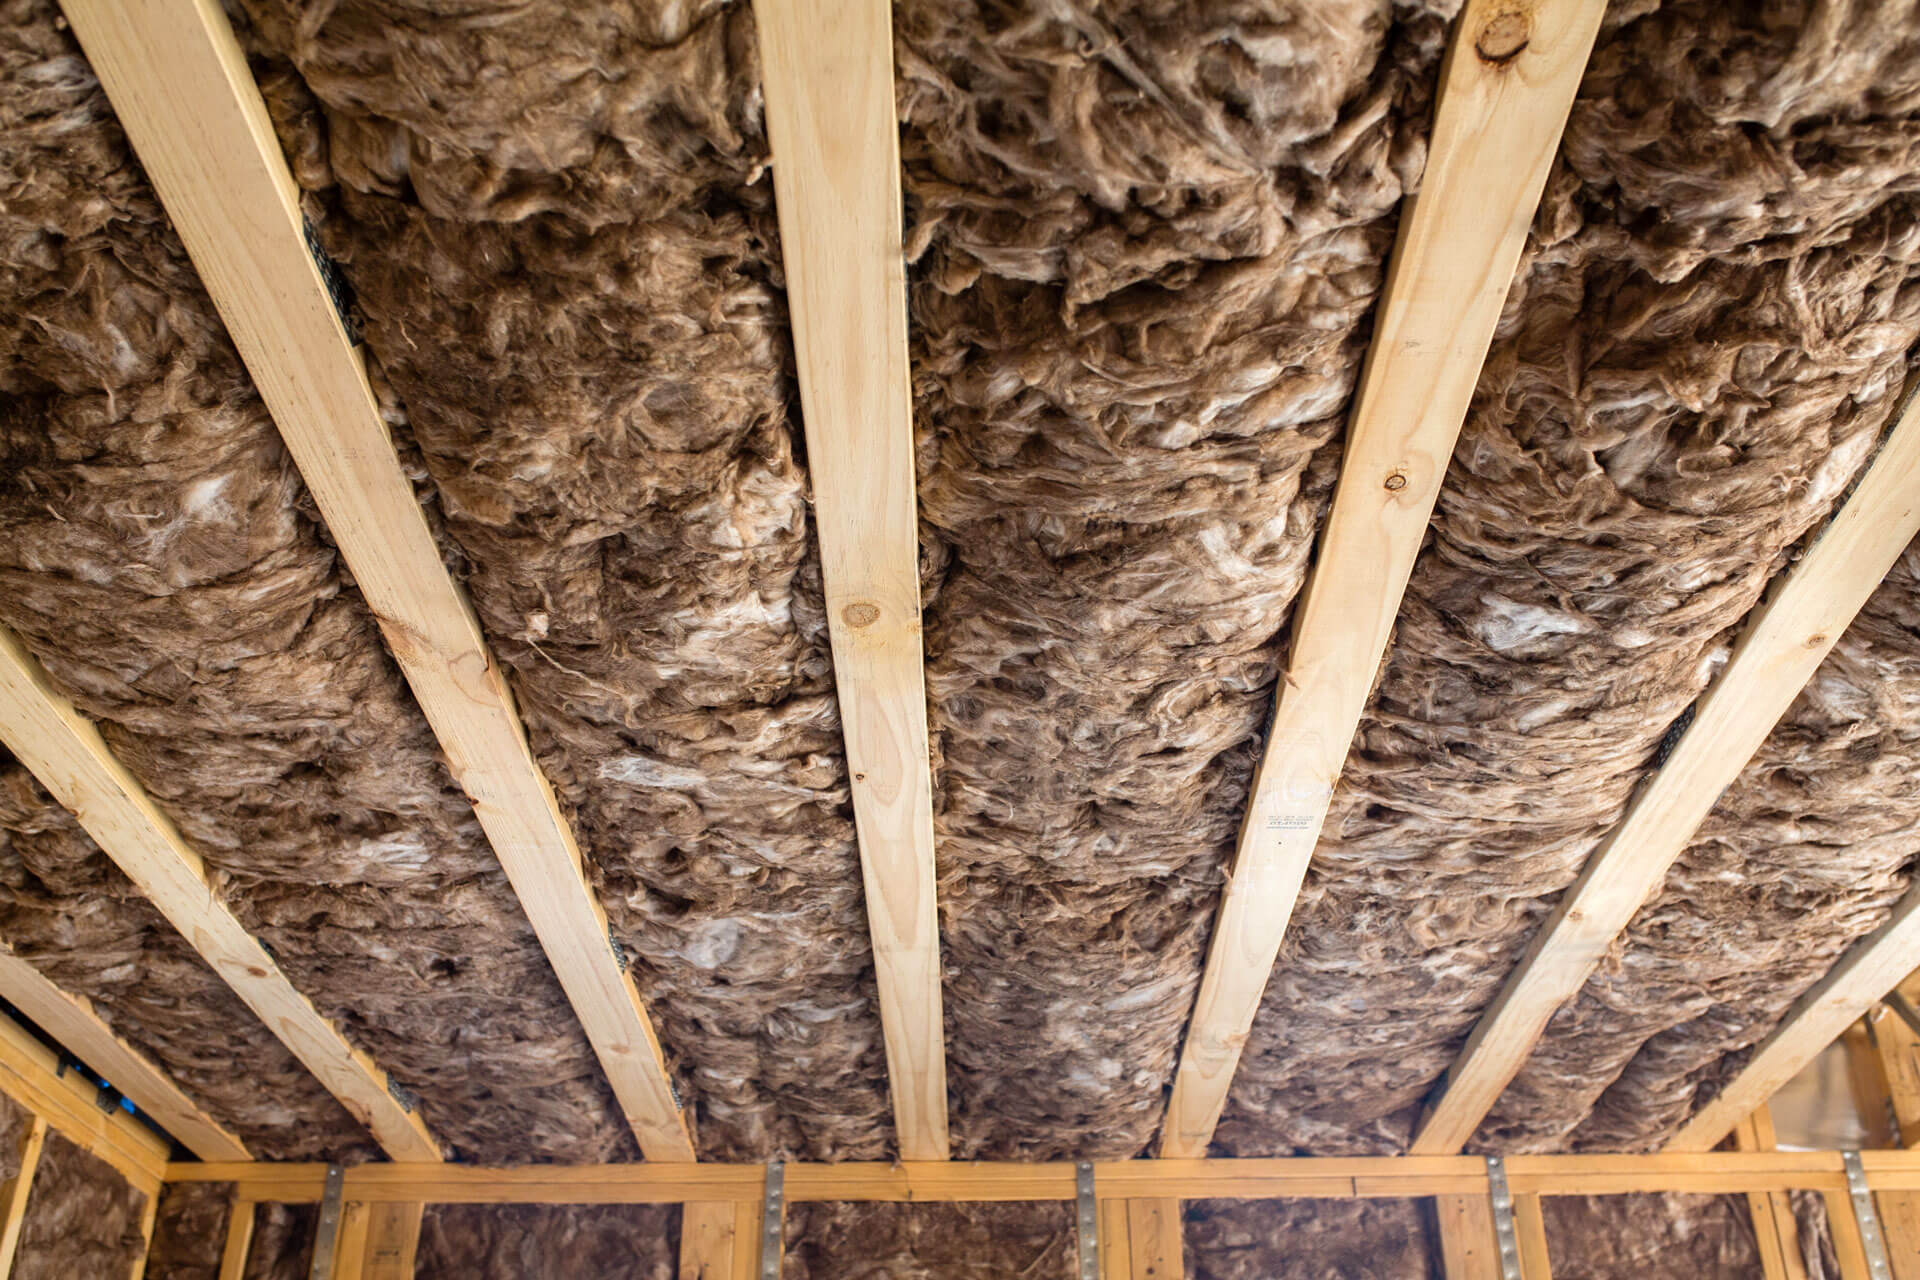 Buy R2.5 Insulation Online - Cheap R2.5 Ceiling Insulation Batts